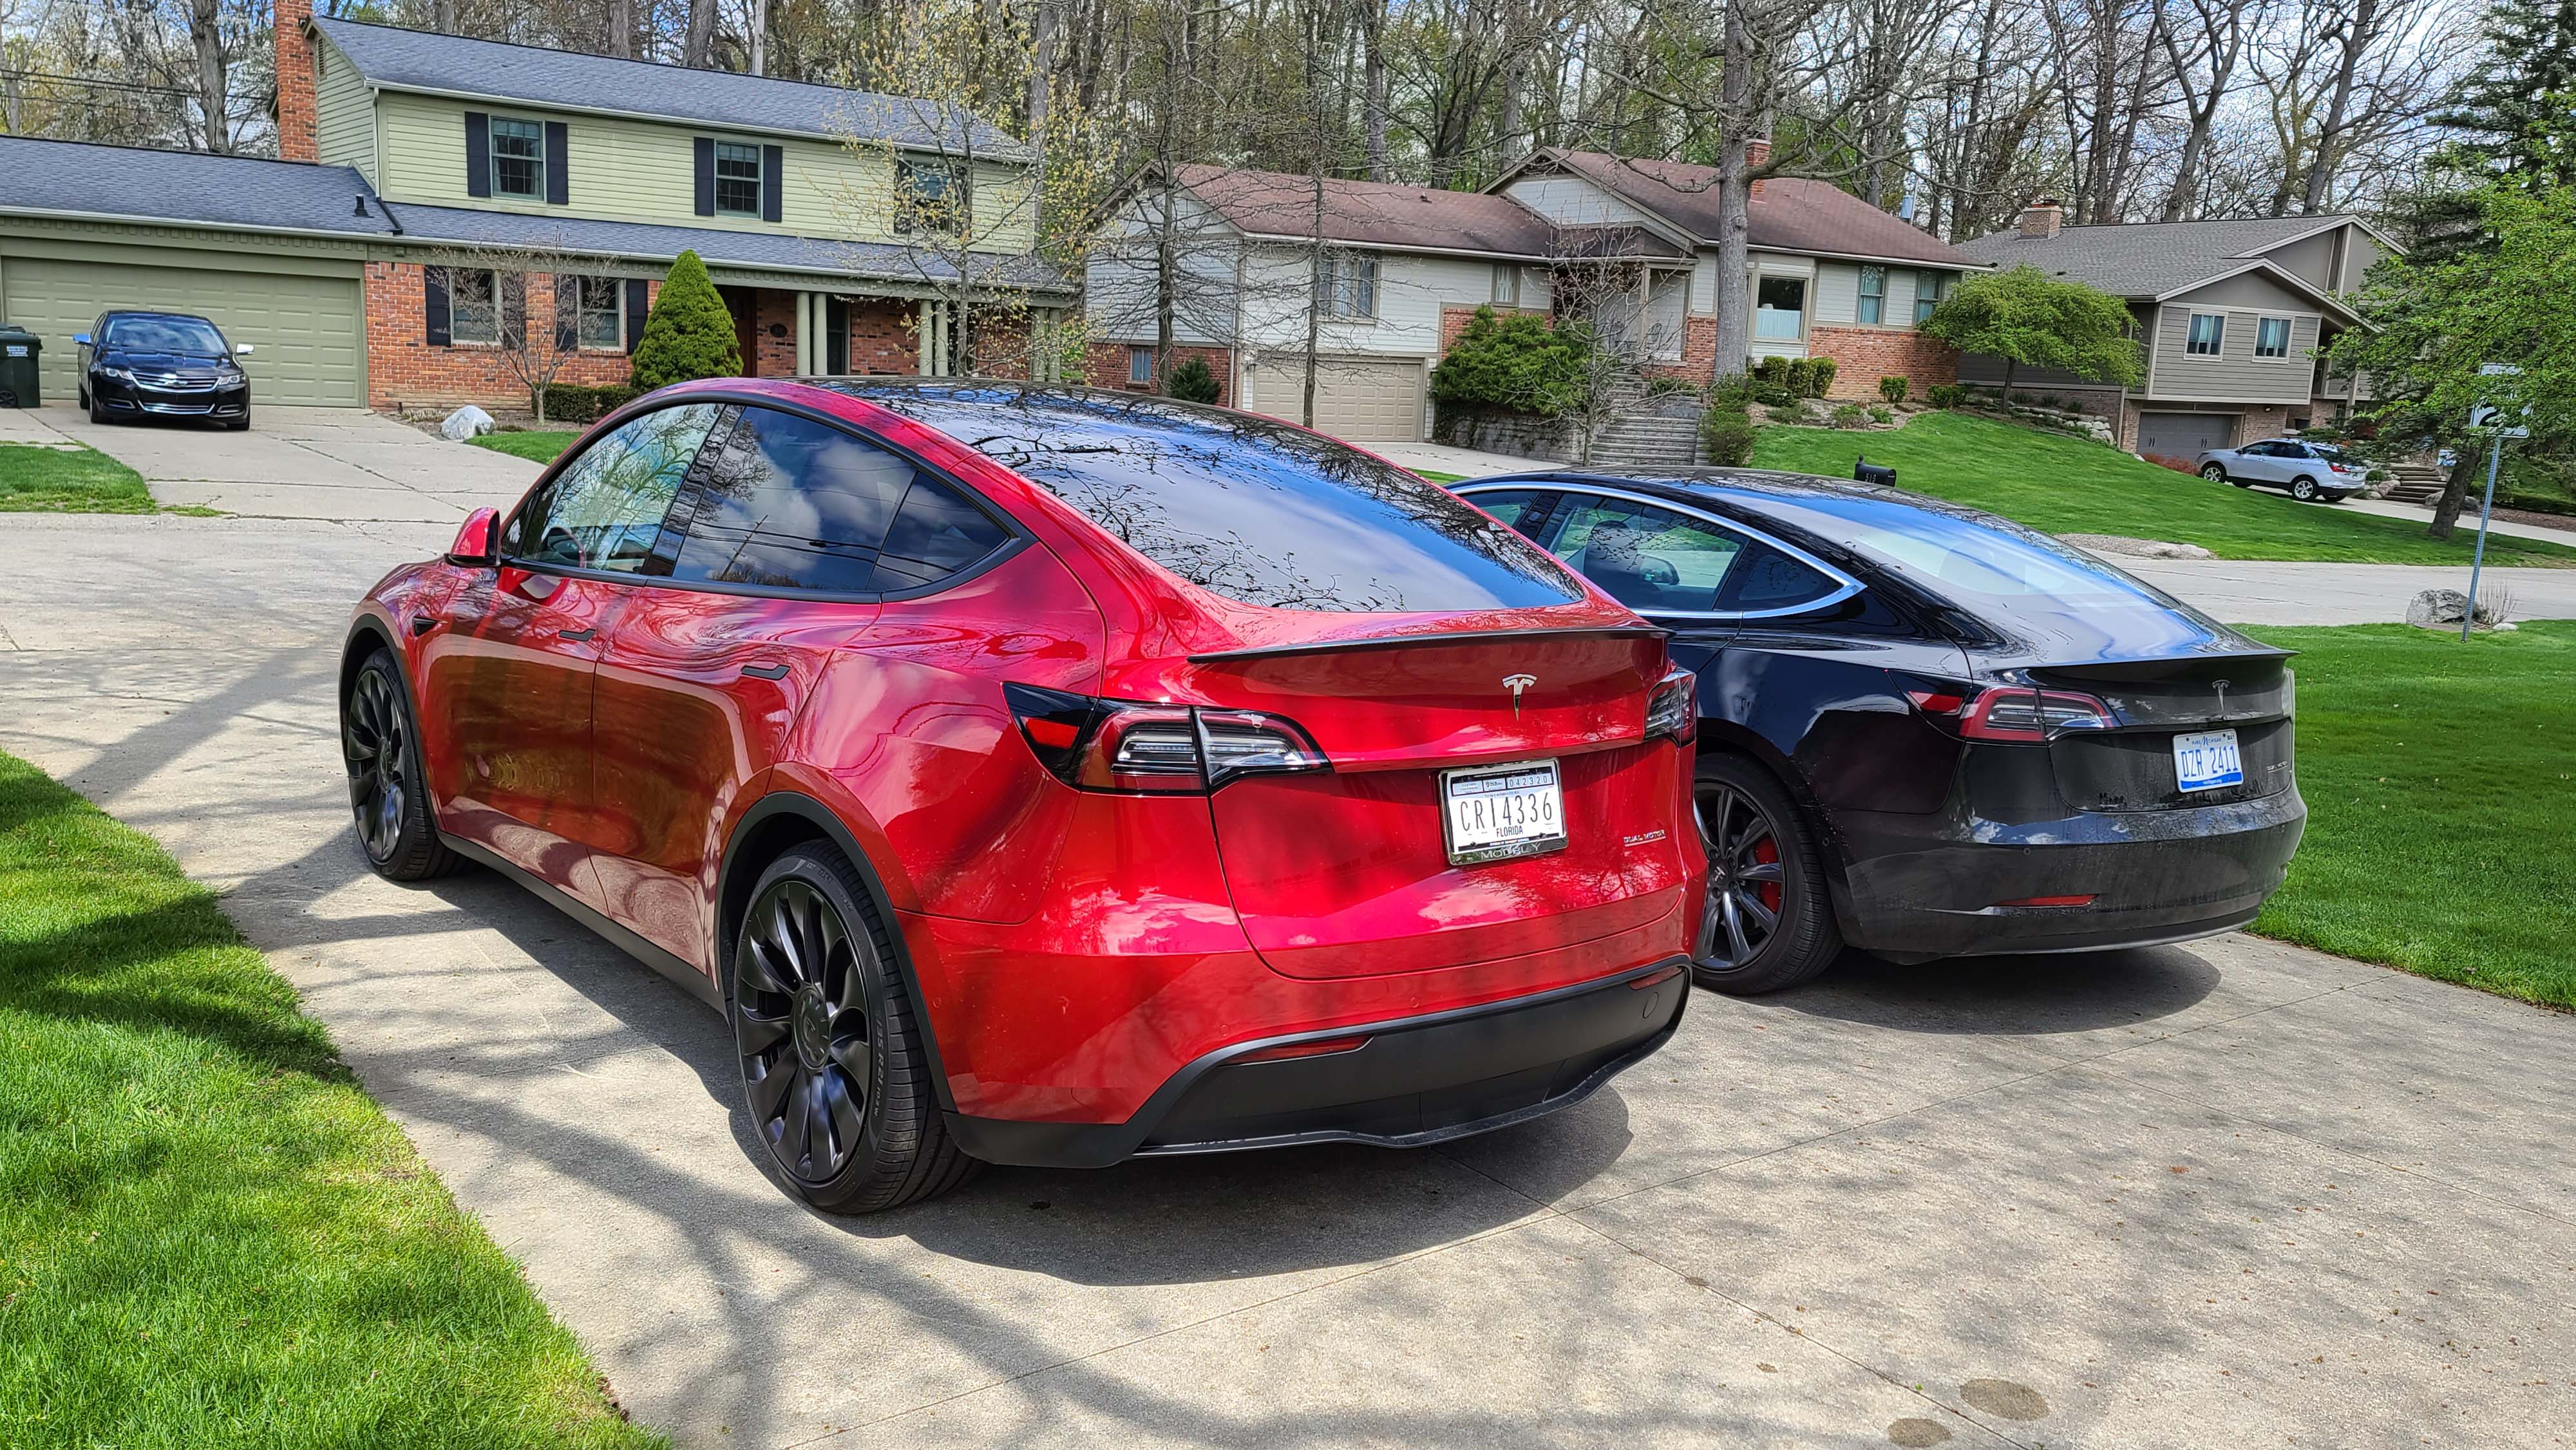 The Tesla Model Y (left) has similar ground clearance to the Model 3 sedan but has a taller SUV seating position and roofline for more interior room.